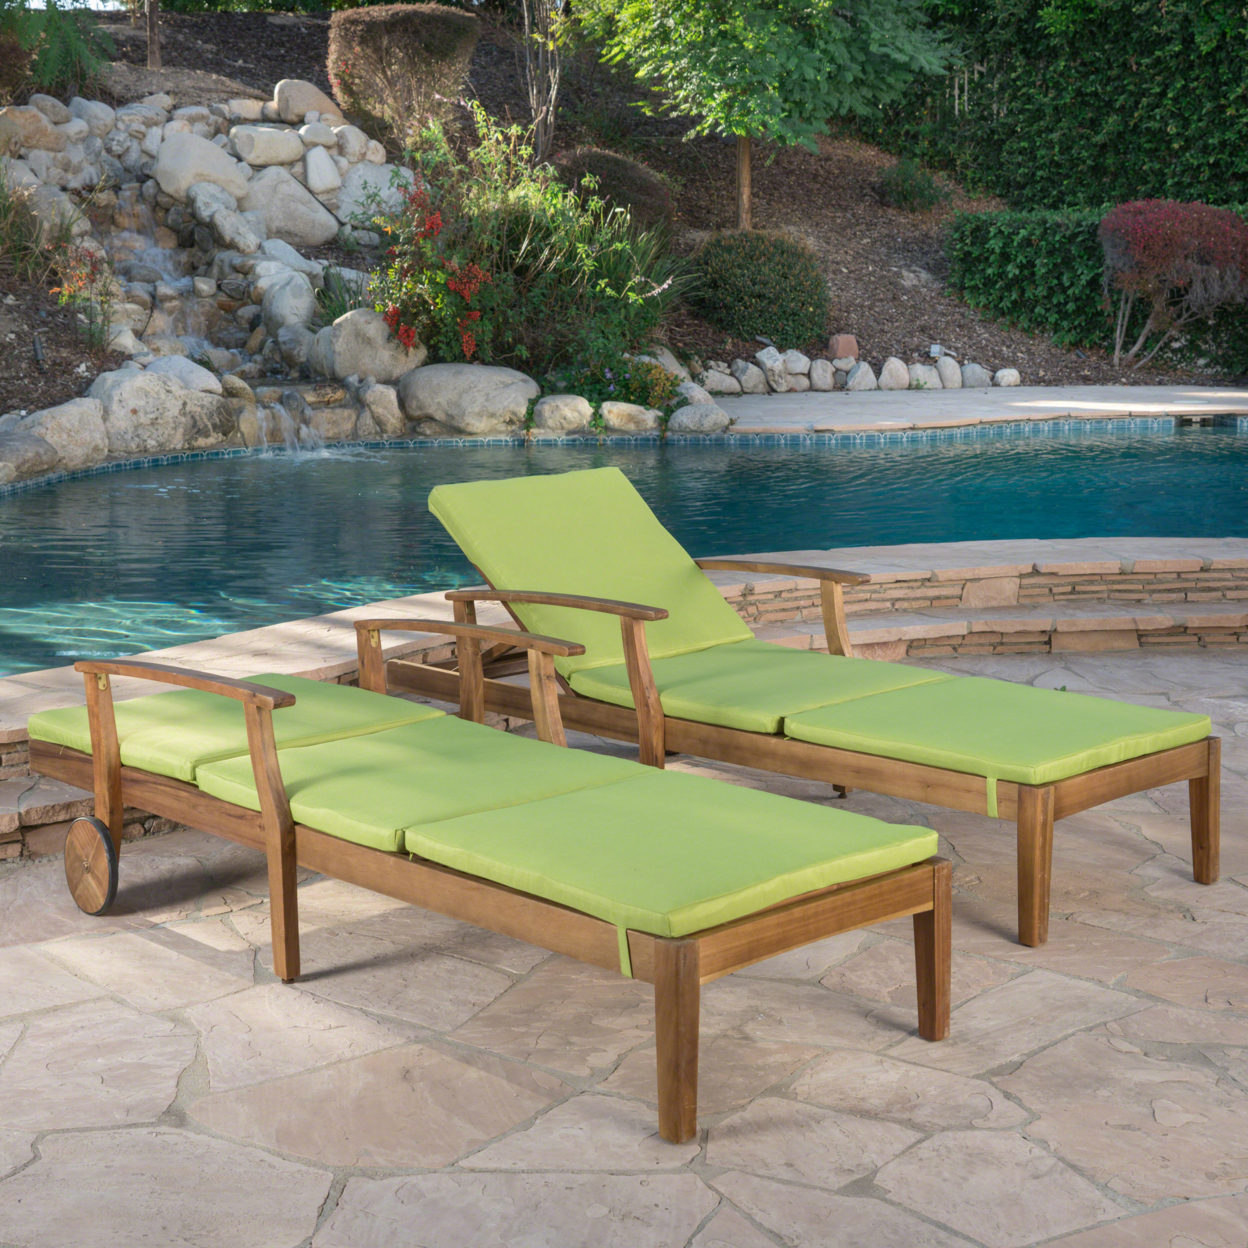 Daisy Outdoor Teak Finish Chaise Lounge With Water Resistant Cushion - Green, Set Of 2